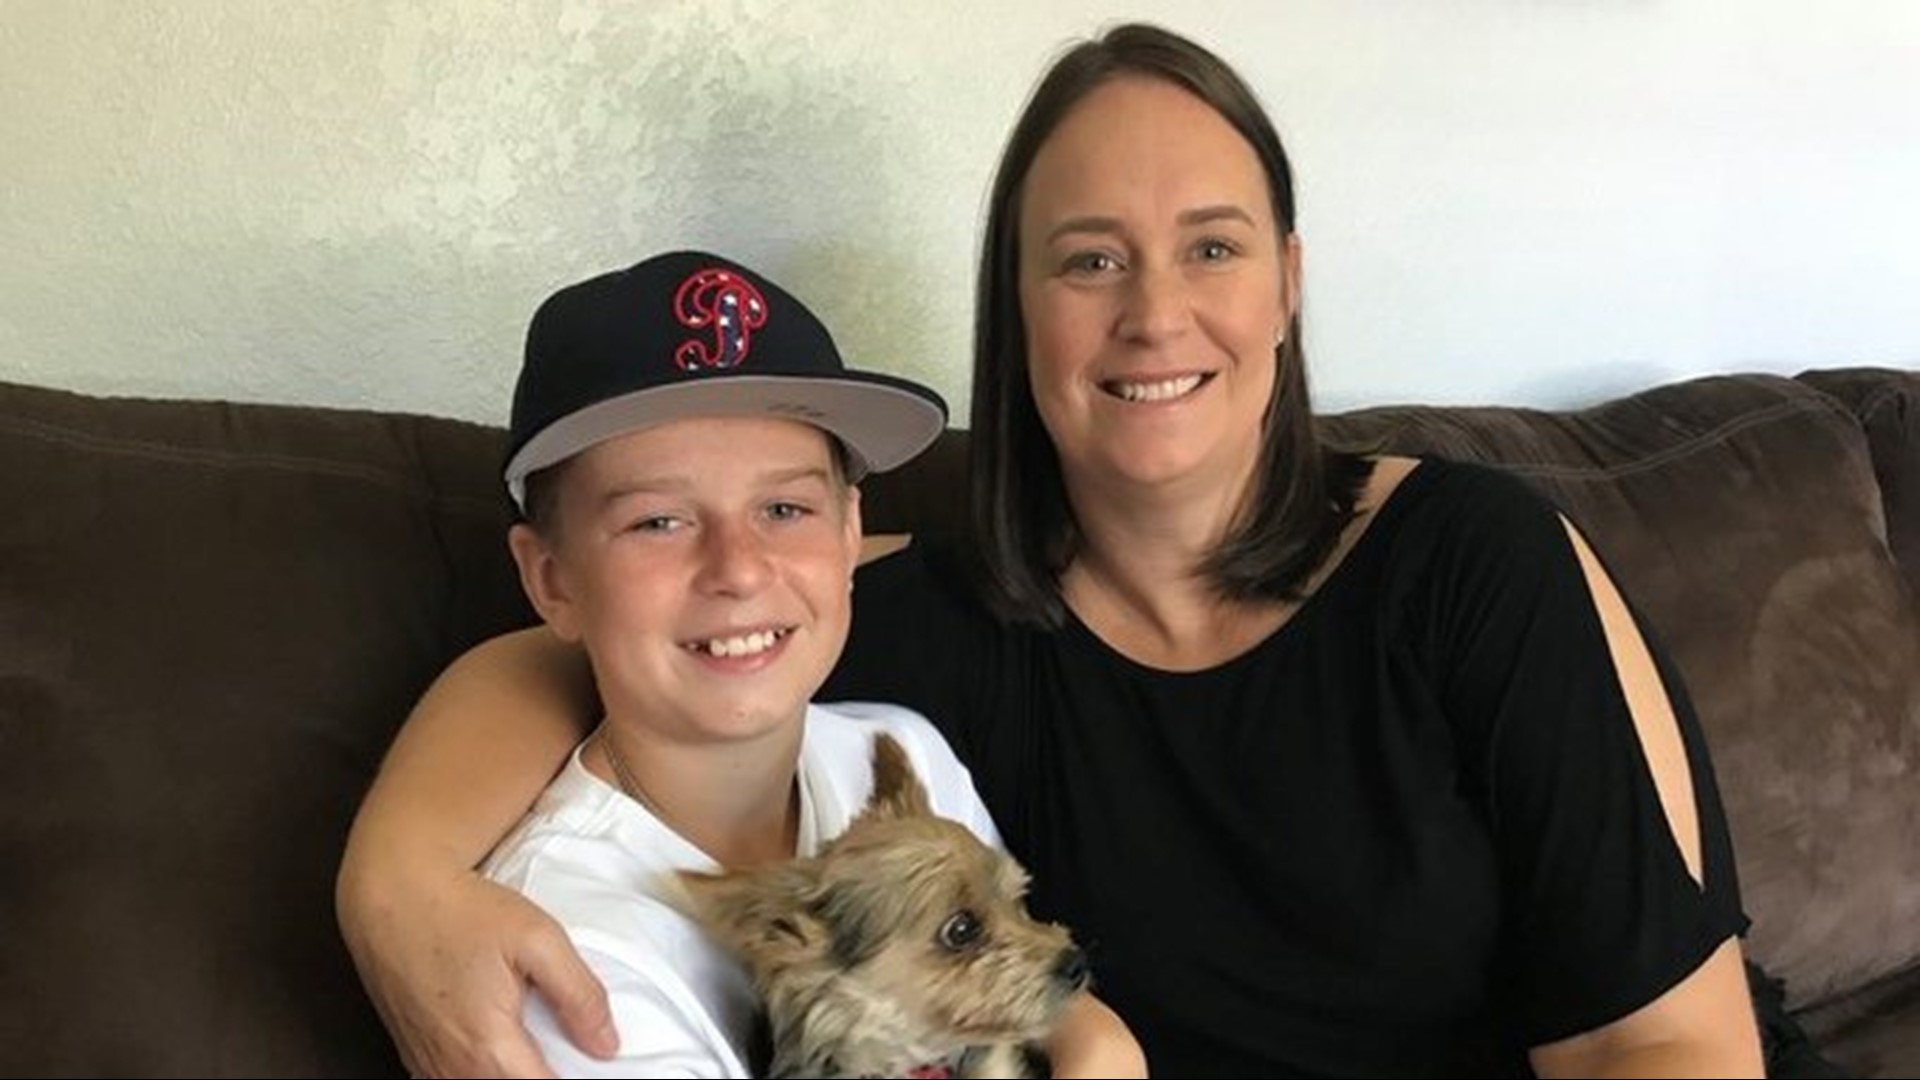 Blake Rose, 12, realized something was wrong when his mom started acting funny and was slurring her words. His quick thinking may have saved her life!
READ MORE: https://bit.ly/319i0vS